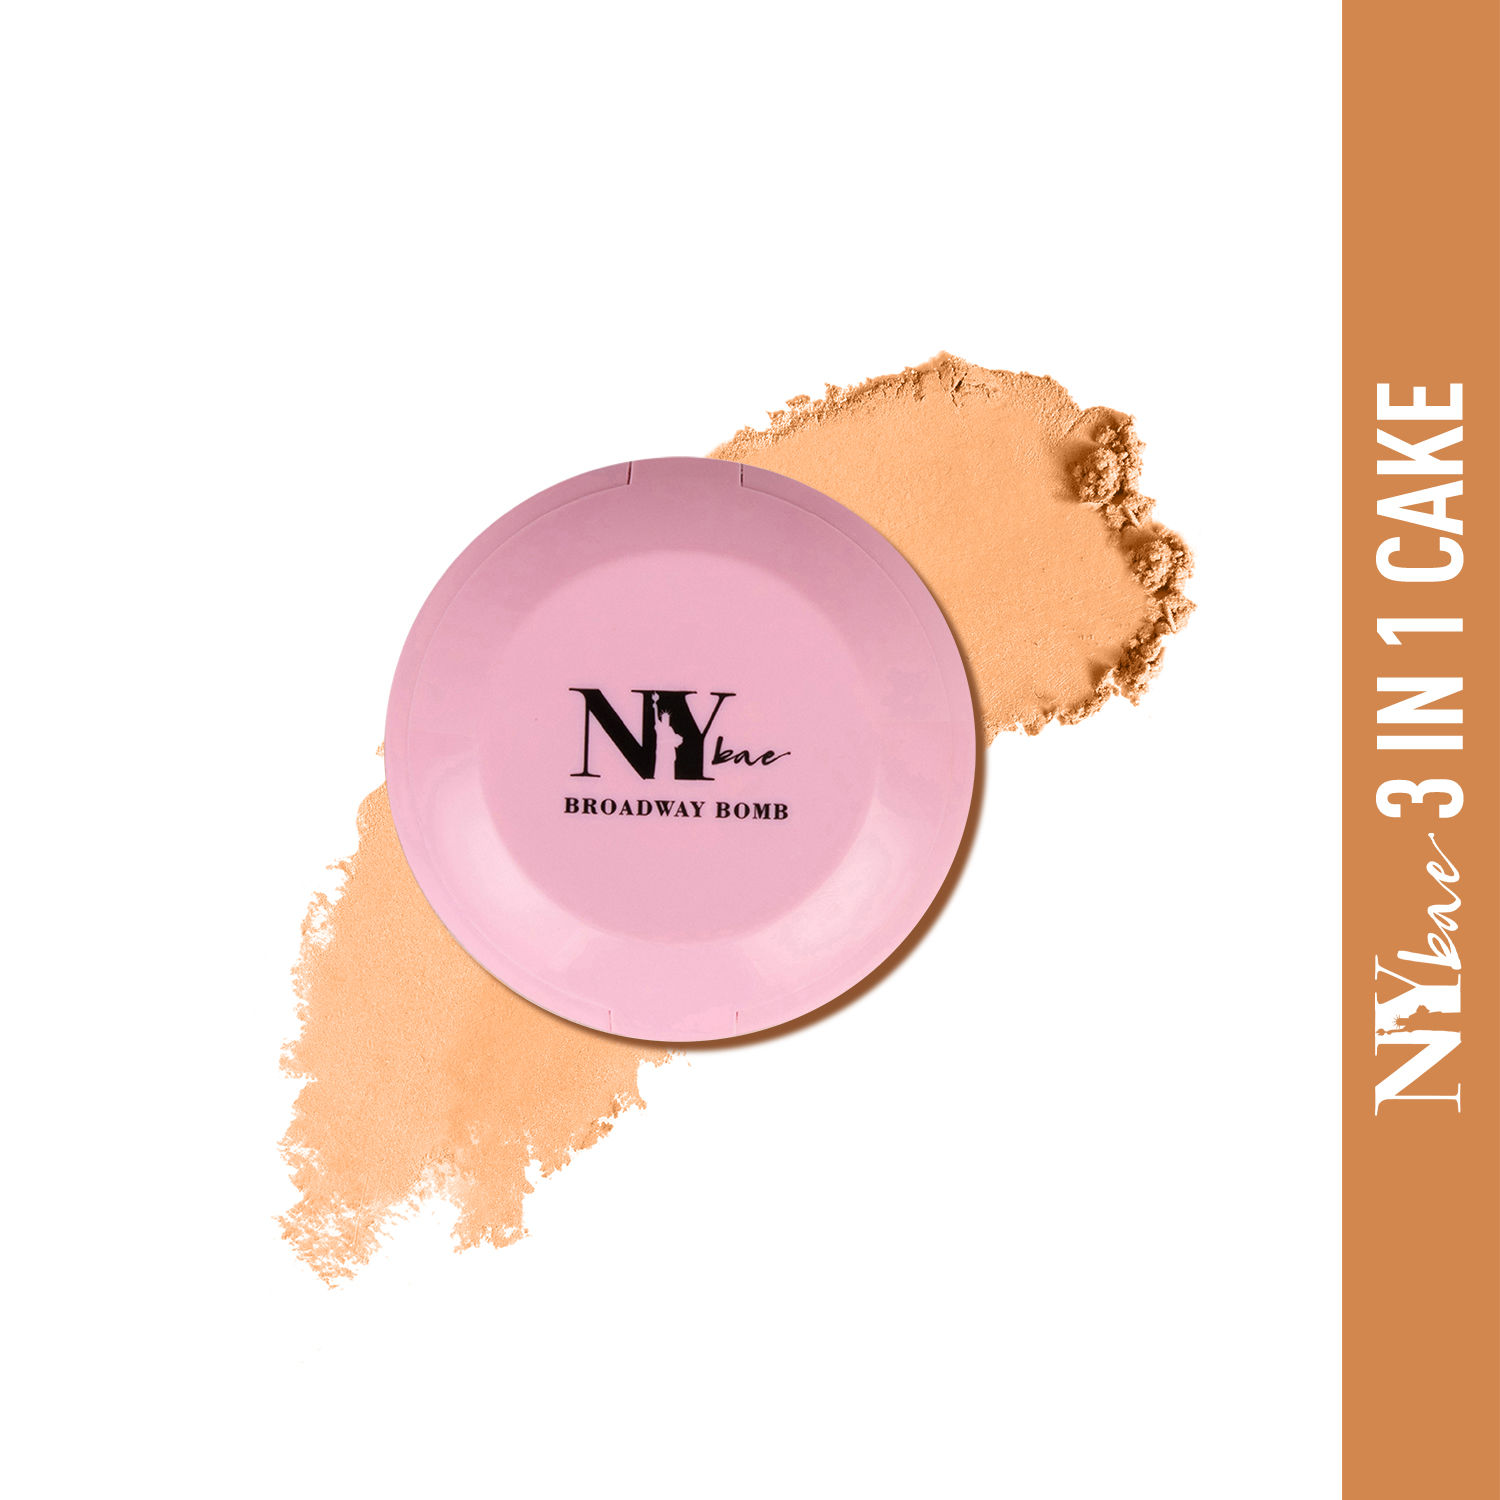 Buy NY Bae 3 in 1 Foundation Concealer and Compact Cake Cream to Powder Texture Broadway Bomb Range - Pearl 3 (Wheatish to Dusky) - Purplle